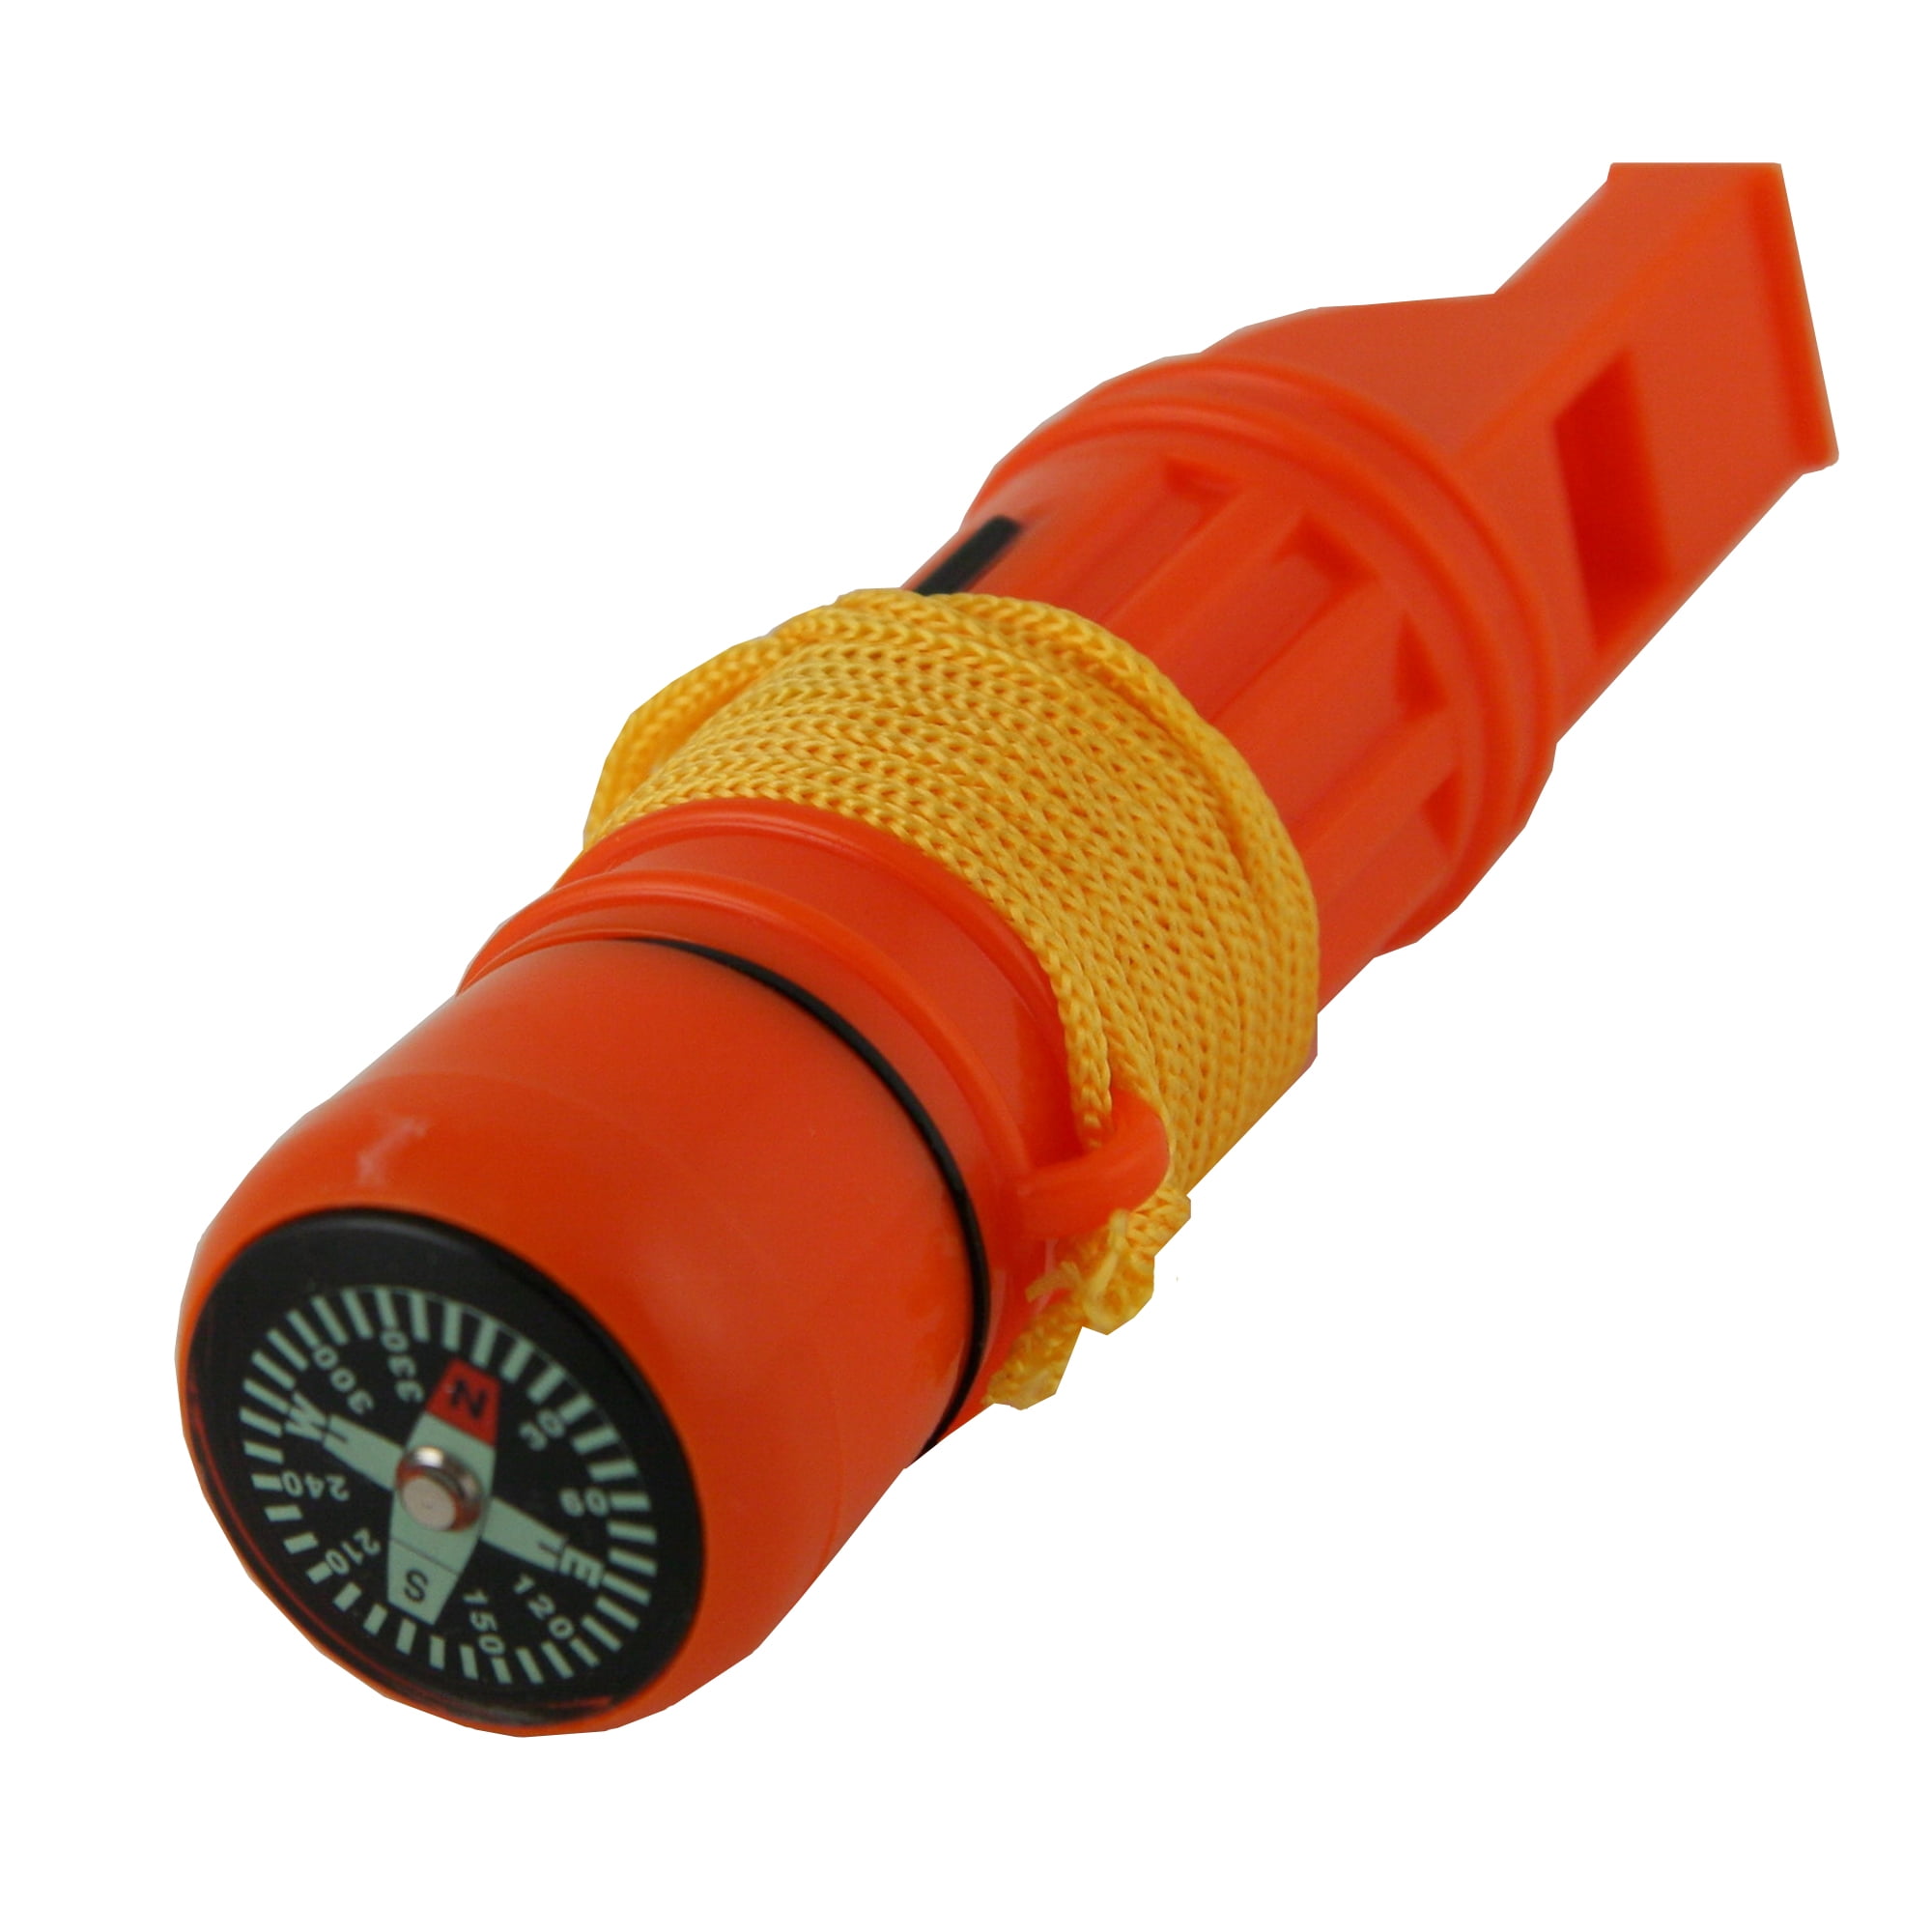 3 Pcs Waterproof Single Chamber Whistle Aluminum Alloy Emergency Safety Whistle Tools of Life for Hike Camp Survival Games